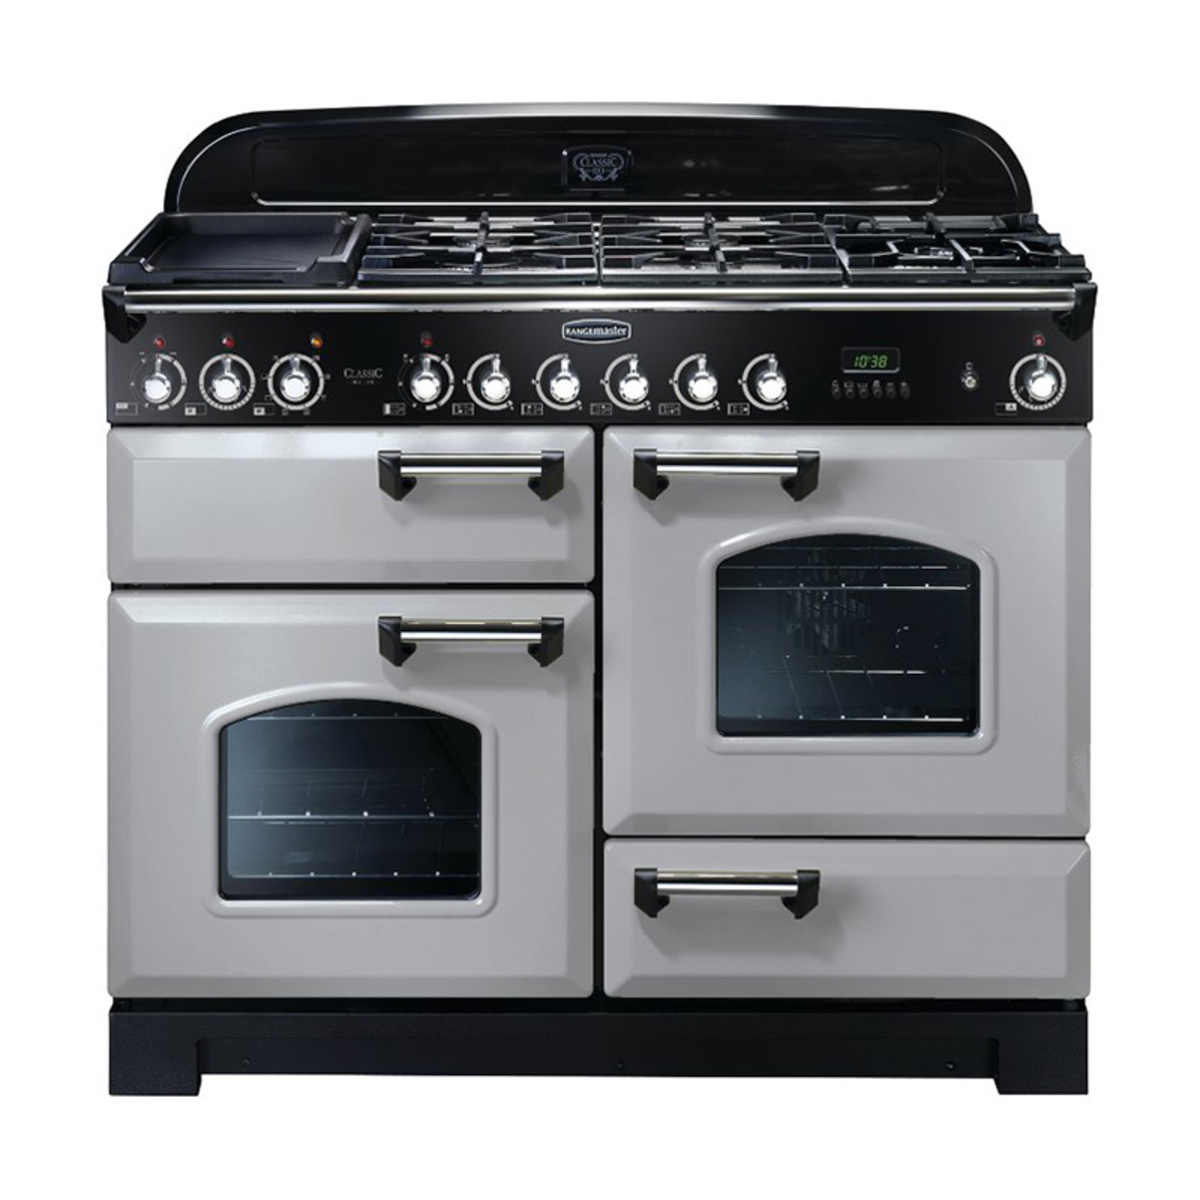 Rangemaster 100650 (CDL110DFFRP/C) CLASSIC DELUXE 110cm Dual Fuel Cooker in Royal P/C